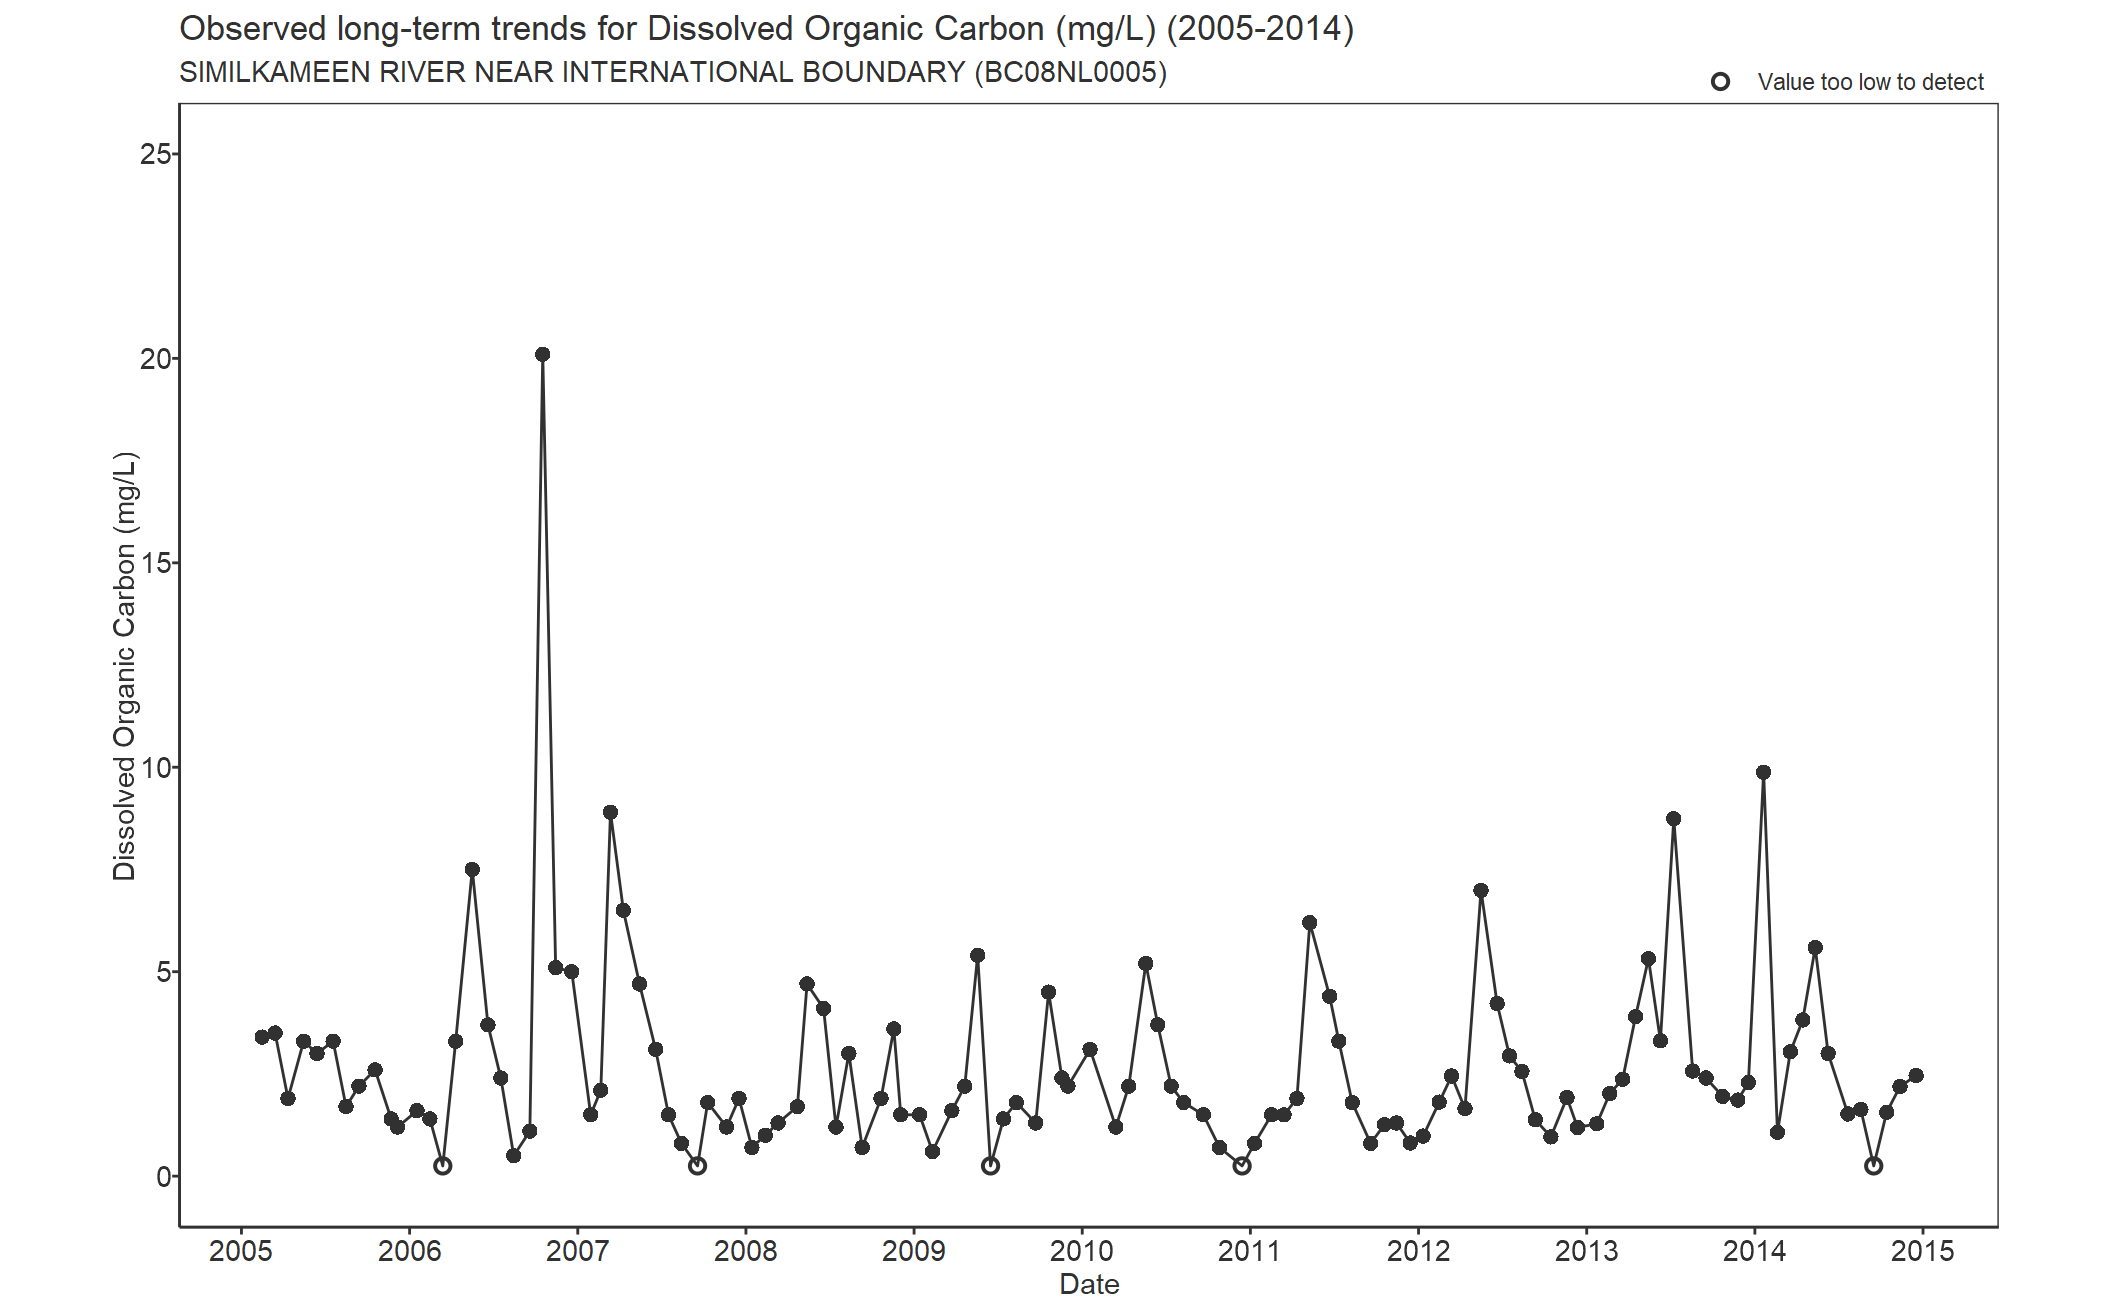 Observed long-term trends for Dissolved Organic Carbon (2005-2014)